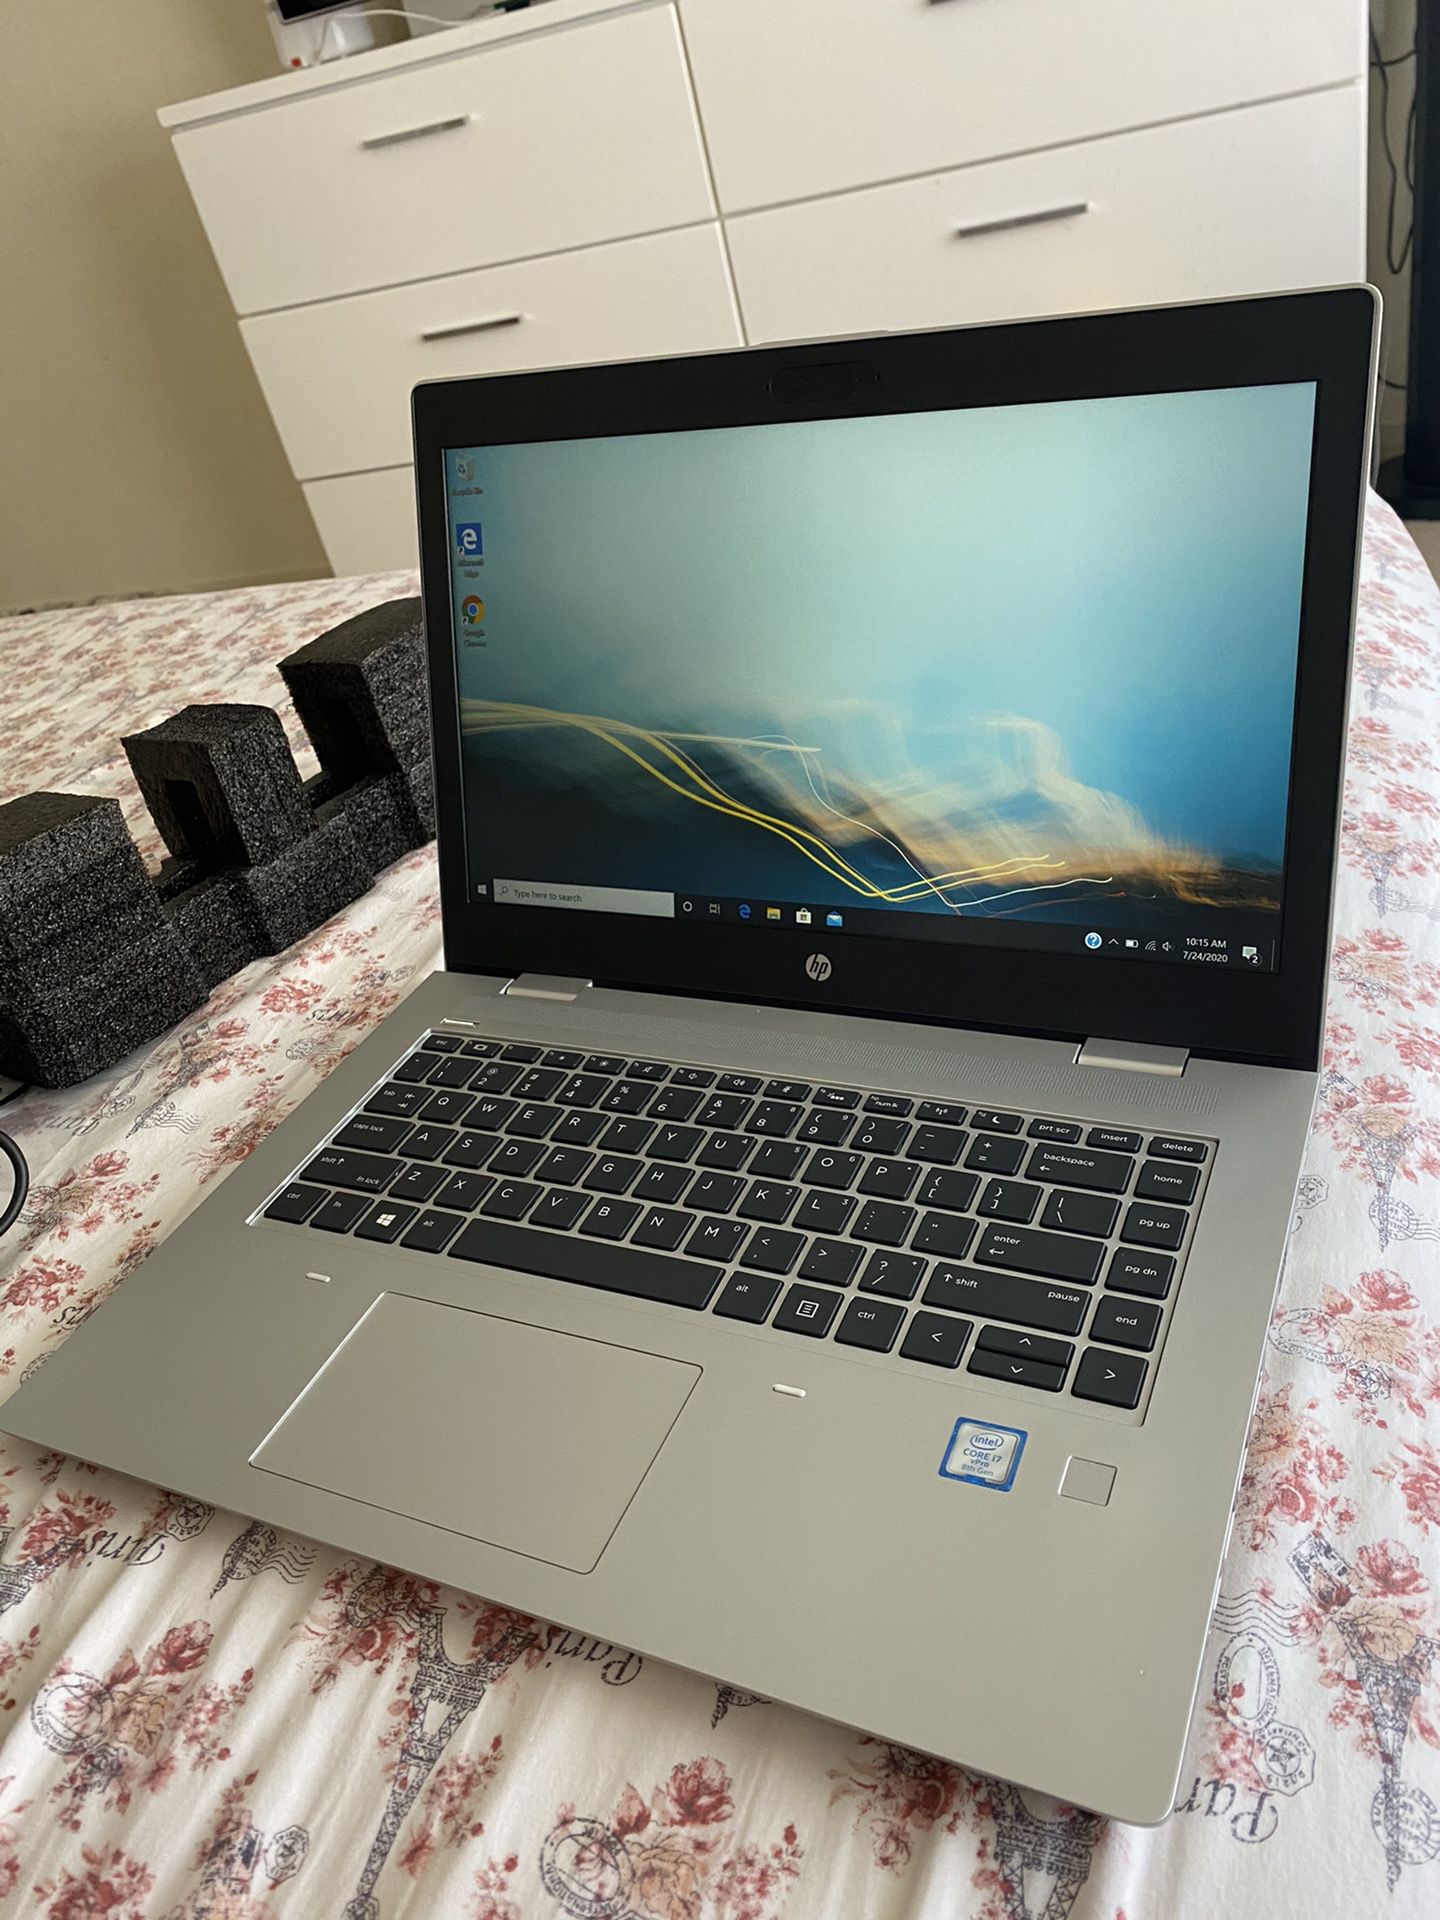 New Powerful Laptop HP Probook 640 G5 with i7, 16GB